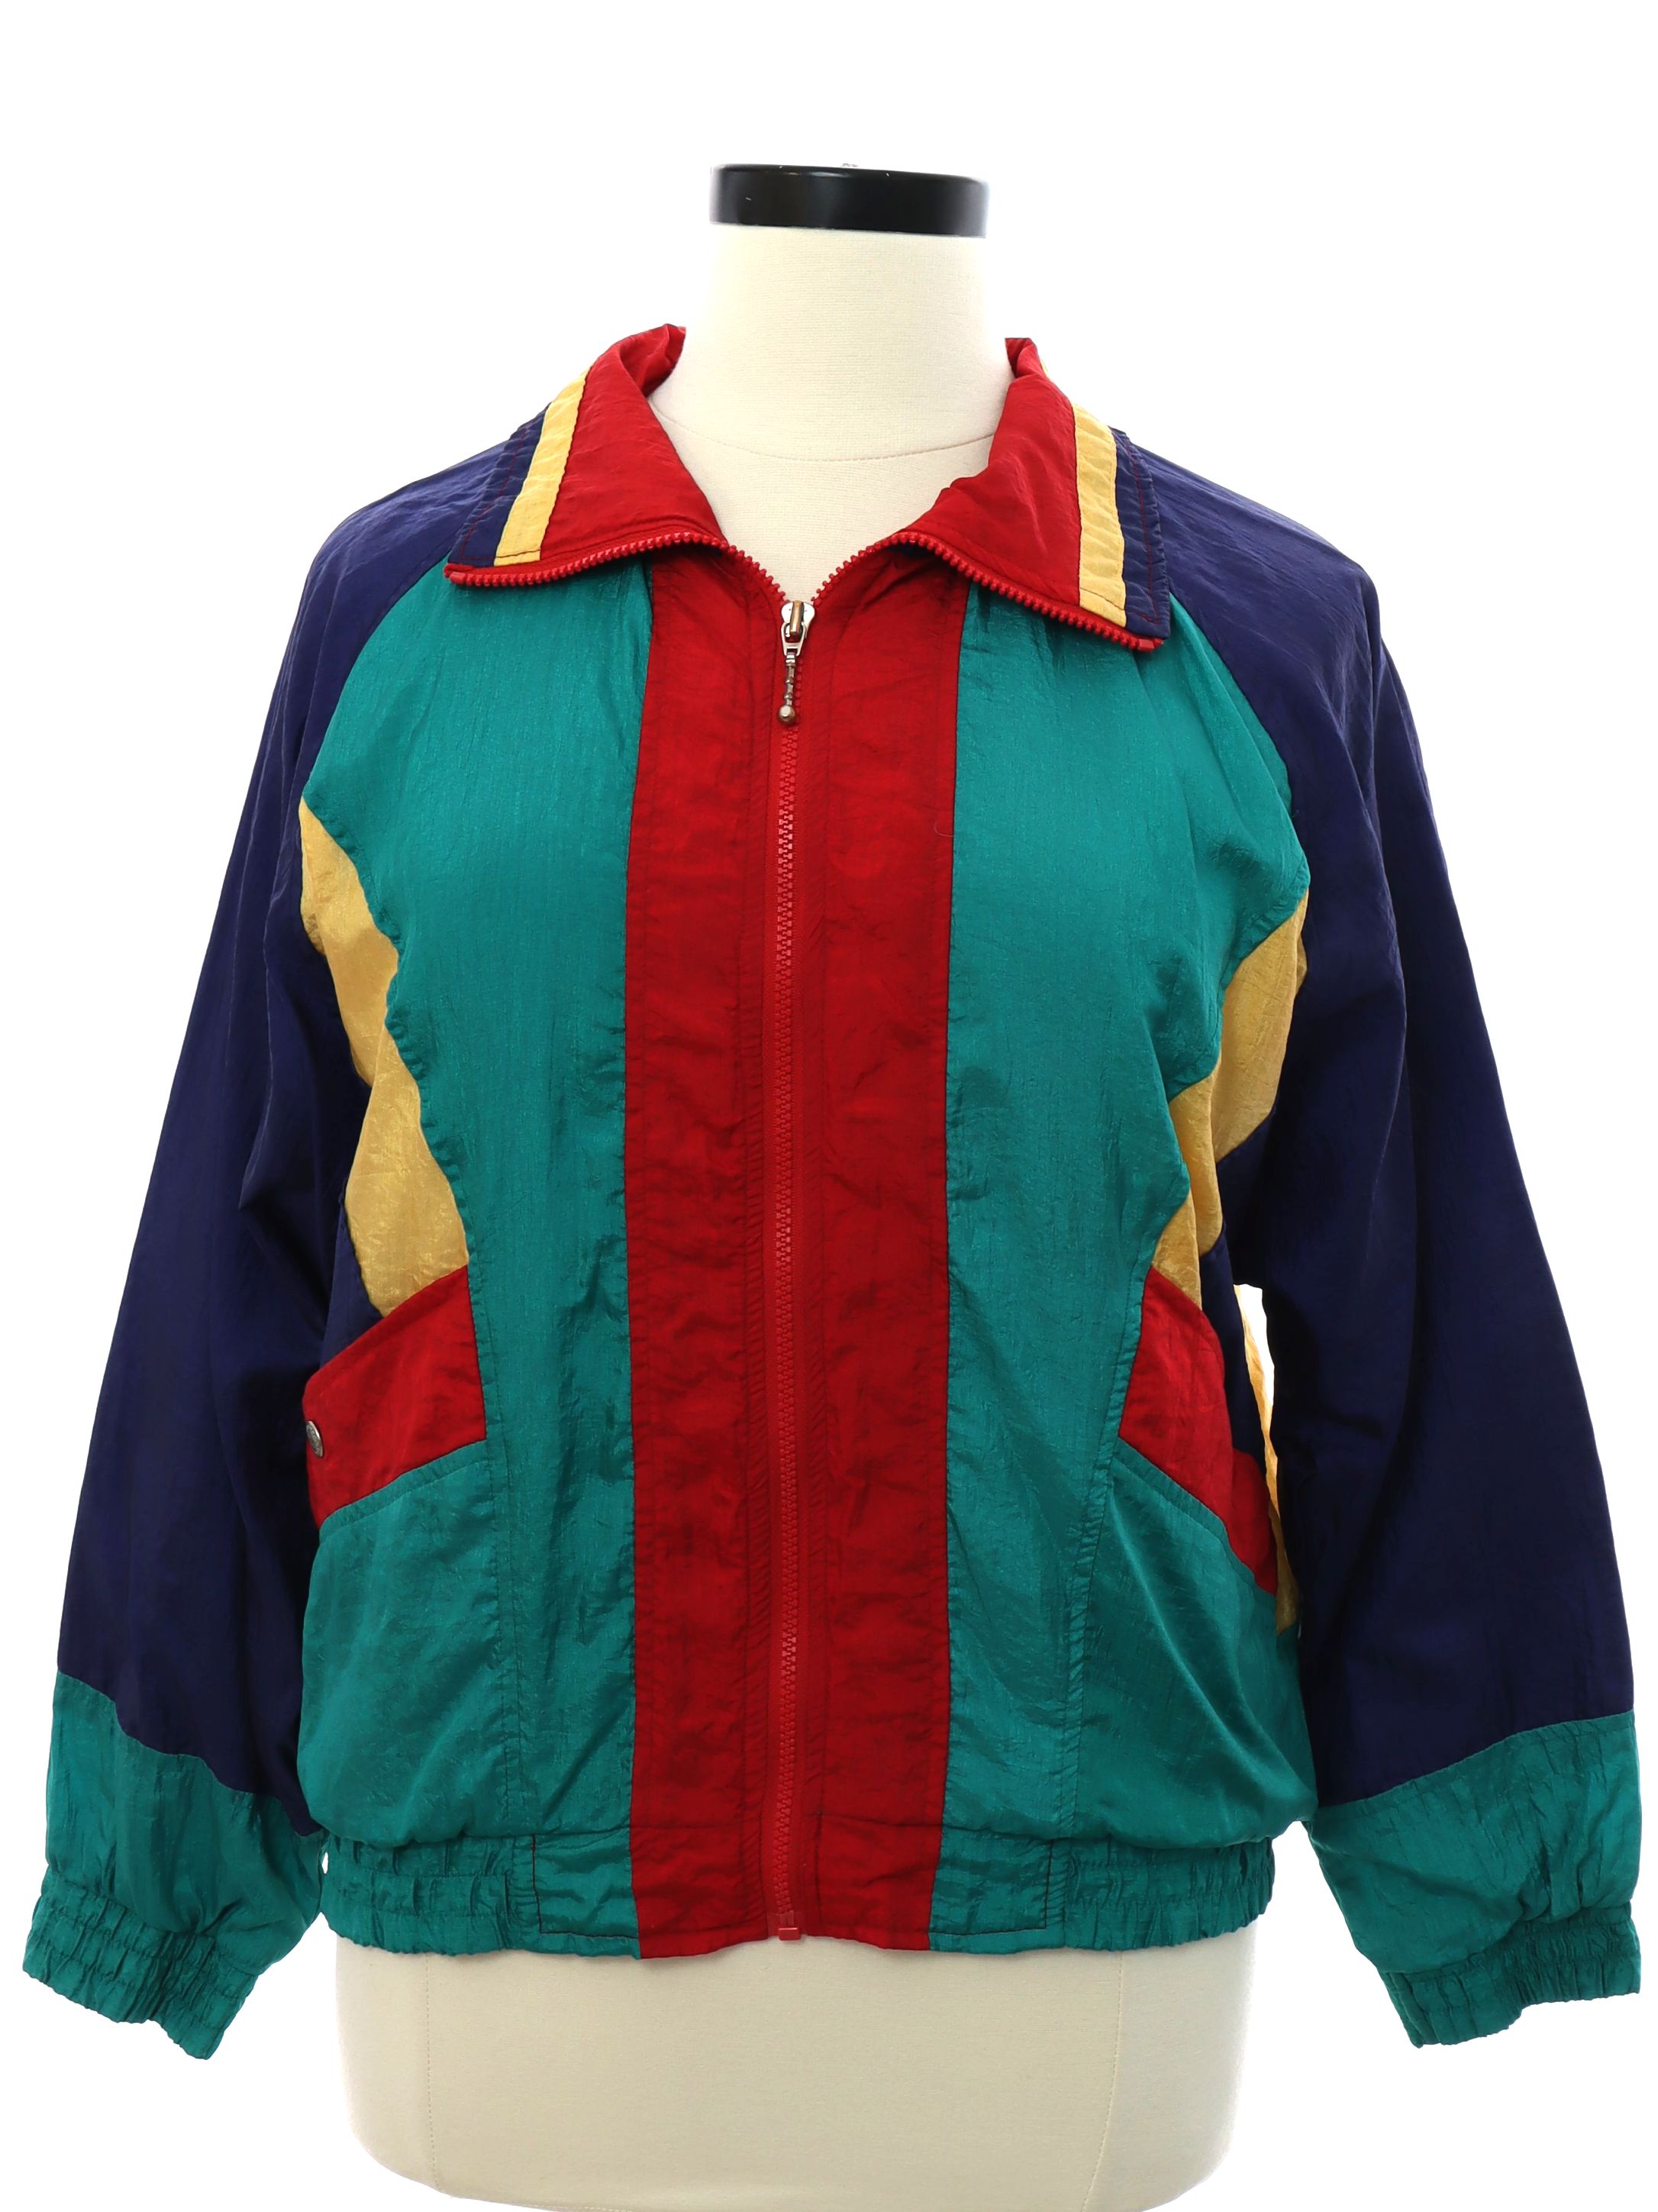 Eighties Athletic Works Jacket: Late 80s or Early 90s -Athletic Works ...